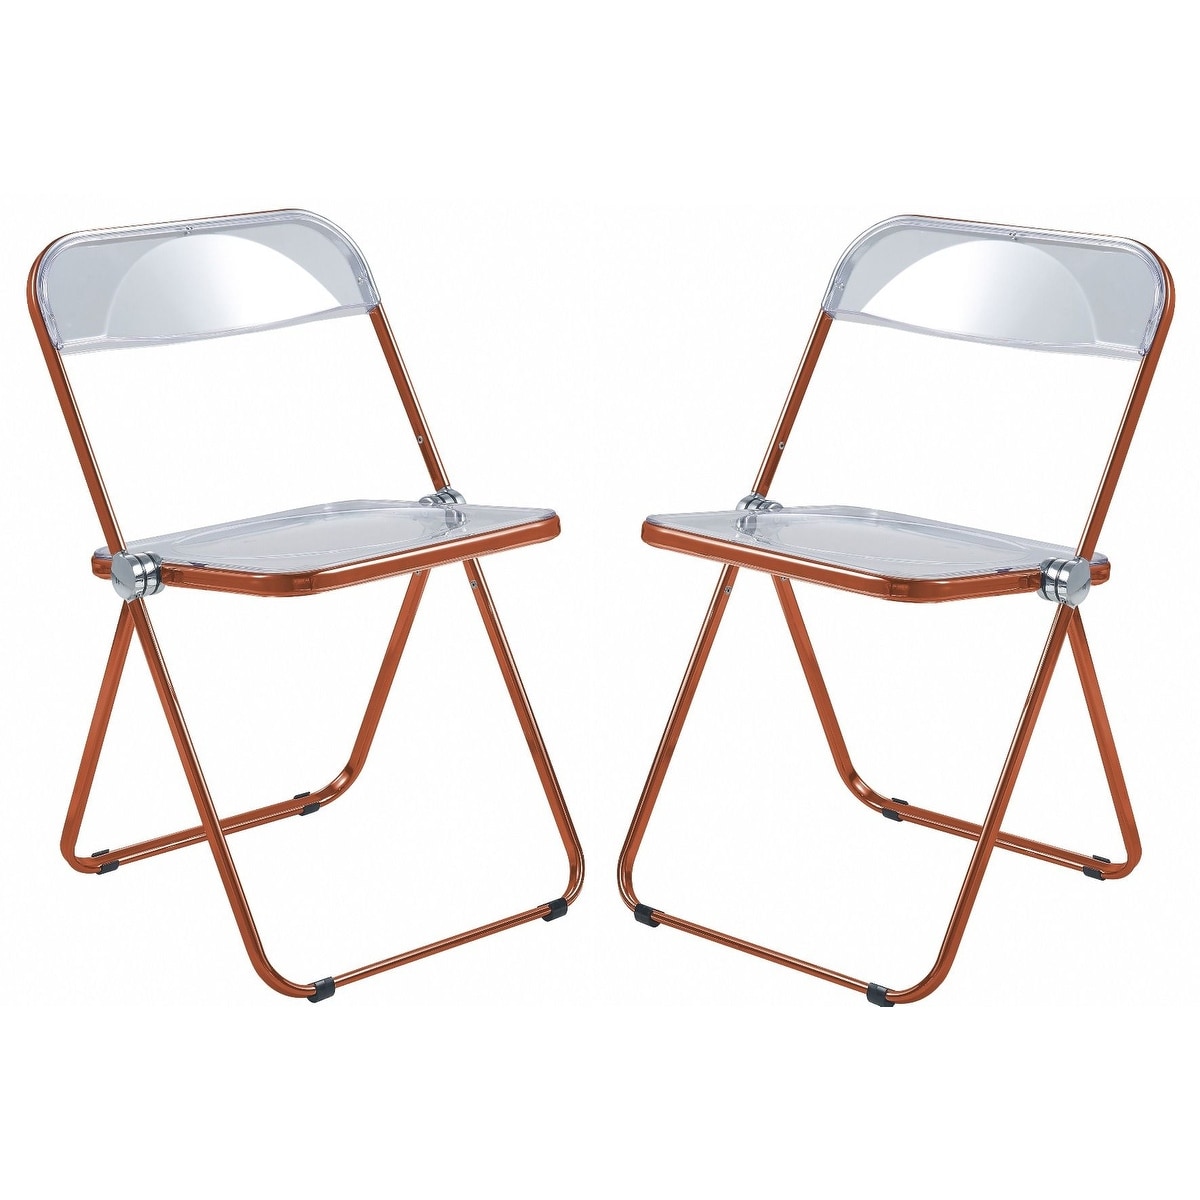 LeisureMod Lawrence Acrylic Folding Chair With Metal Frame Set of 2 - 30 inch